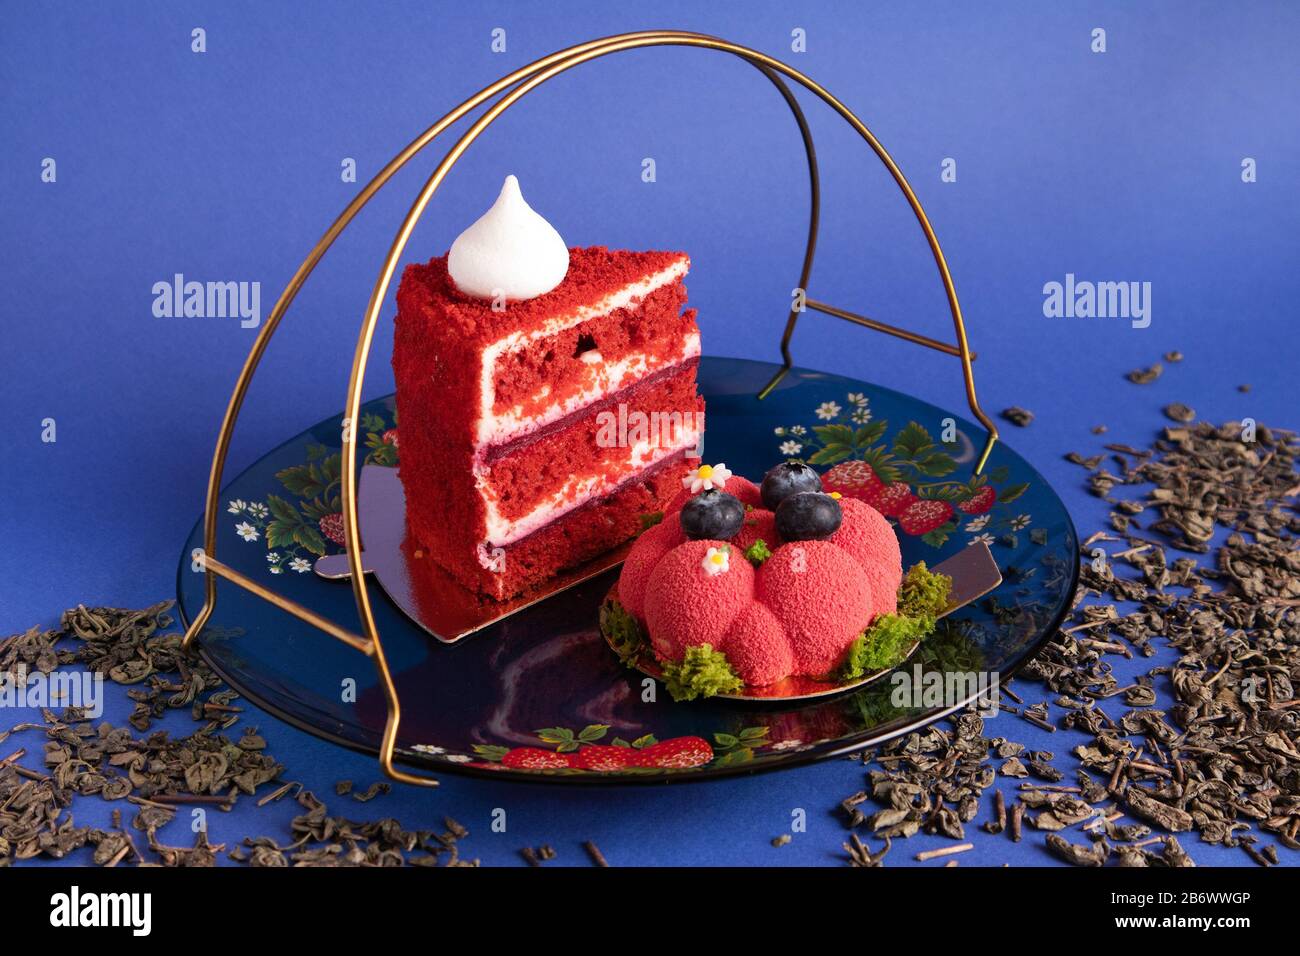 Two appetizing delicious red cakes on a glass plate with scattered dry green tea against violet background Stock Photo